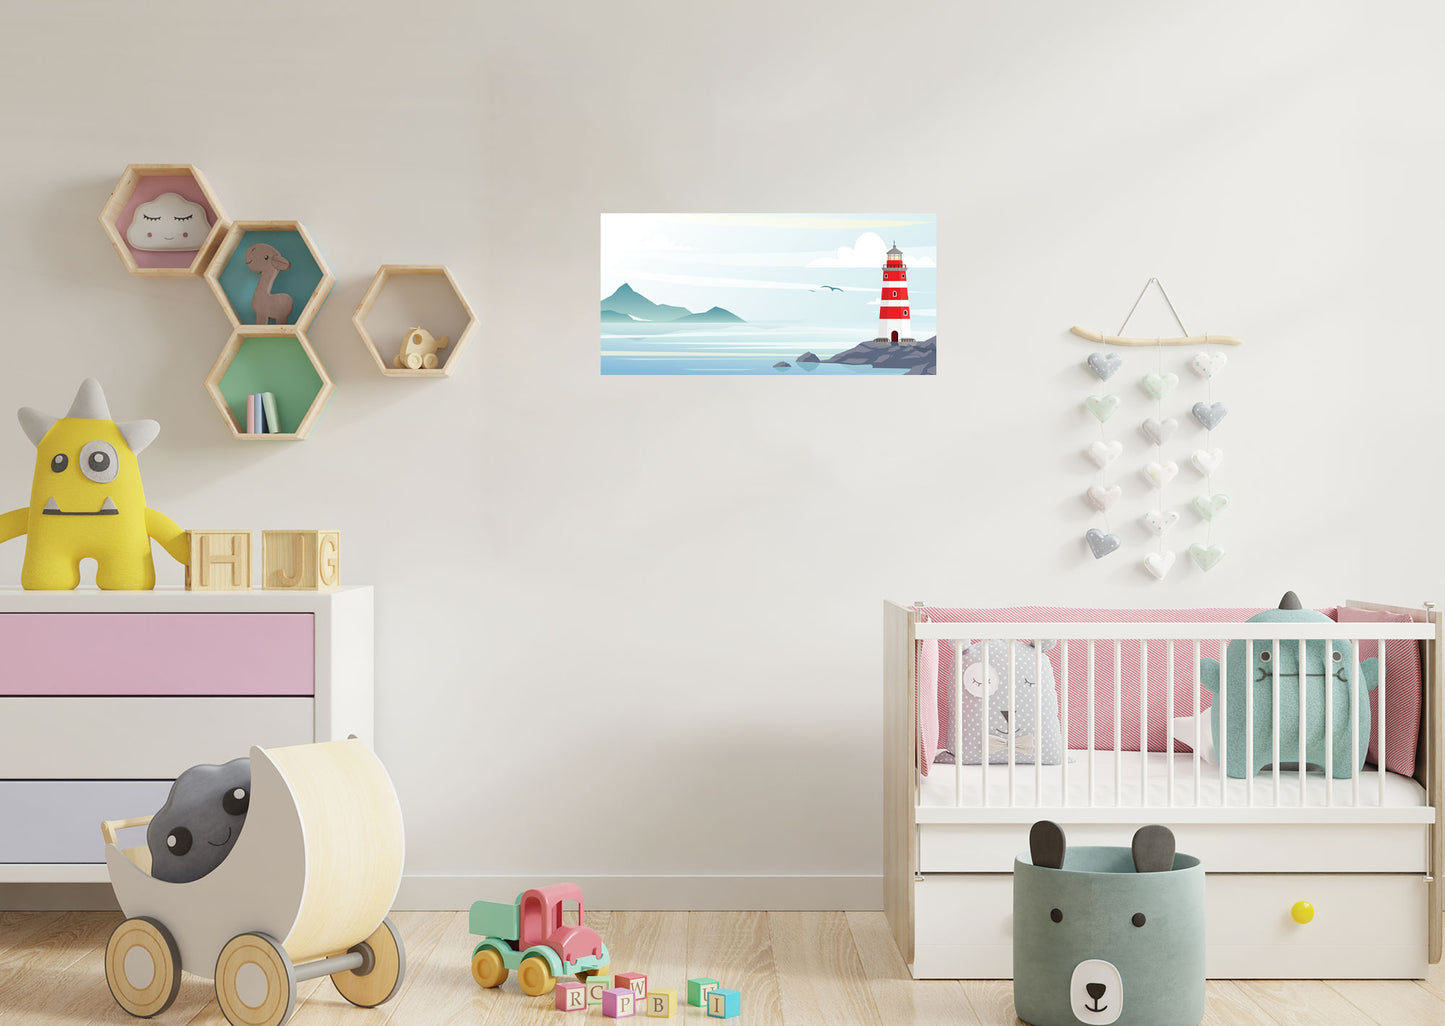 Nursery:  Lighthouse Mural        -   Removable Wall   Adhesive Decal